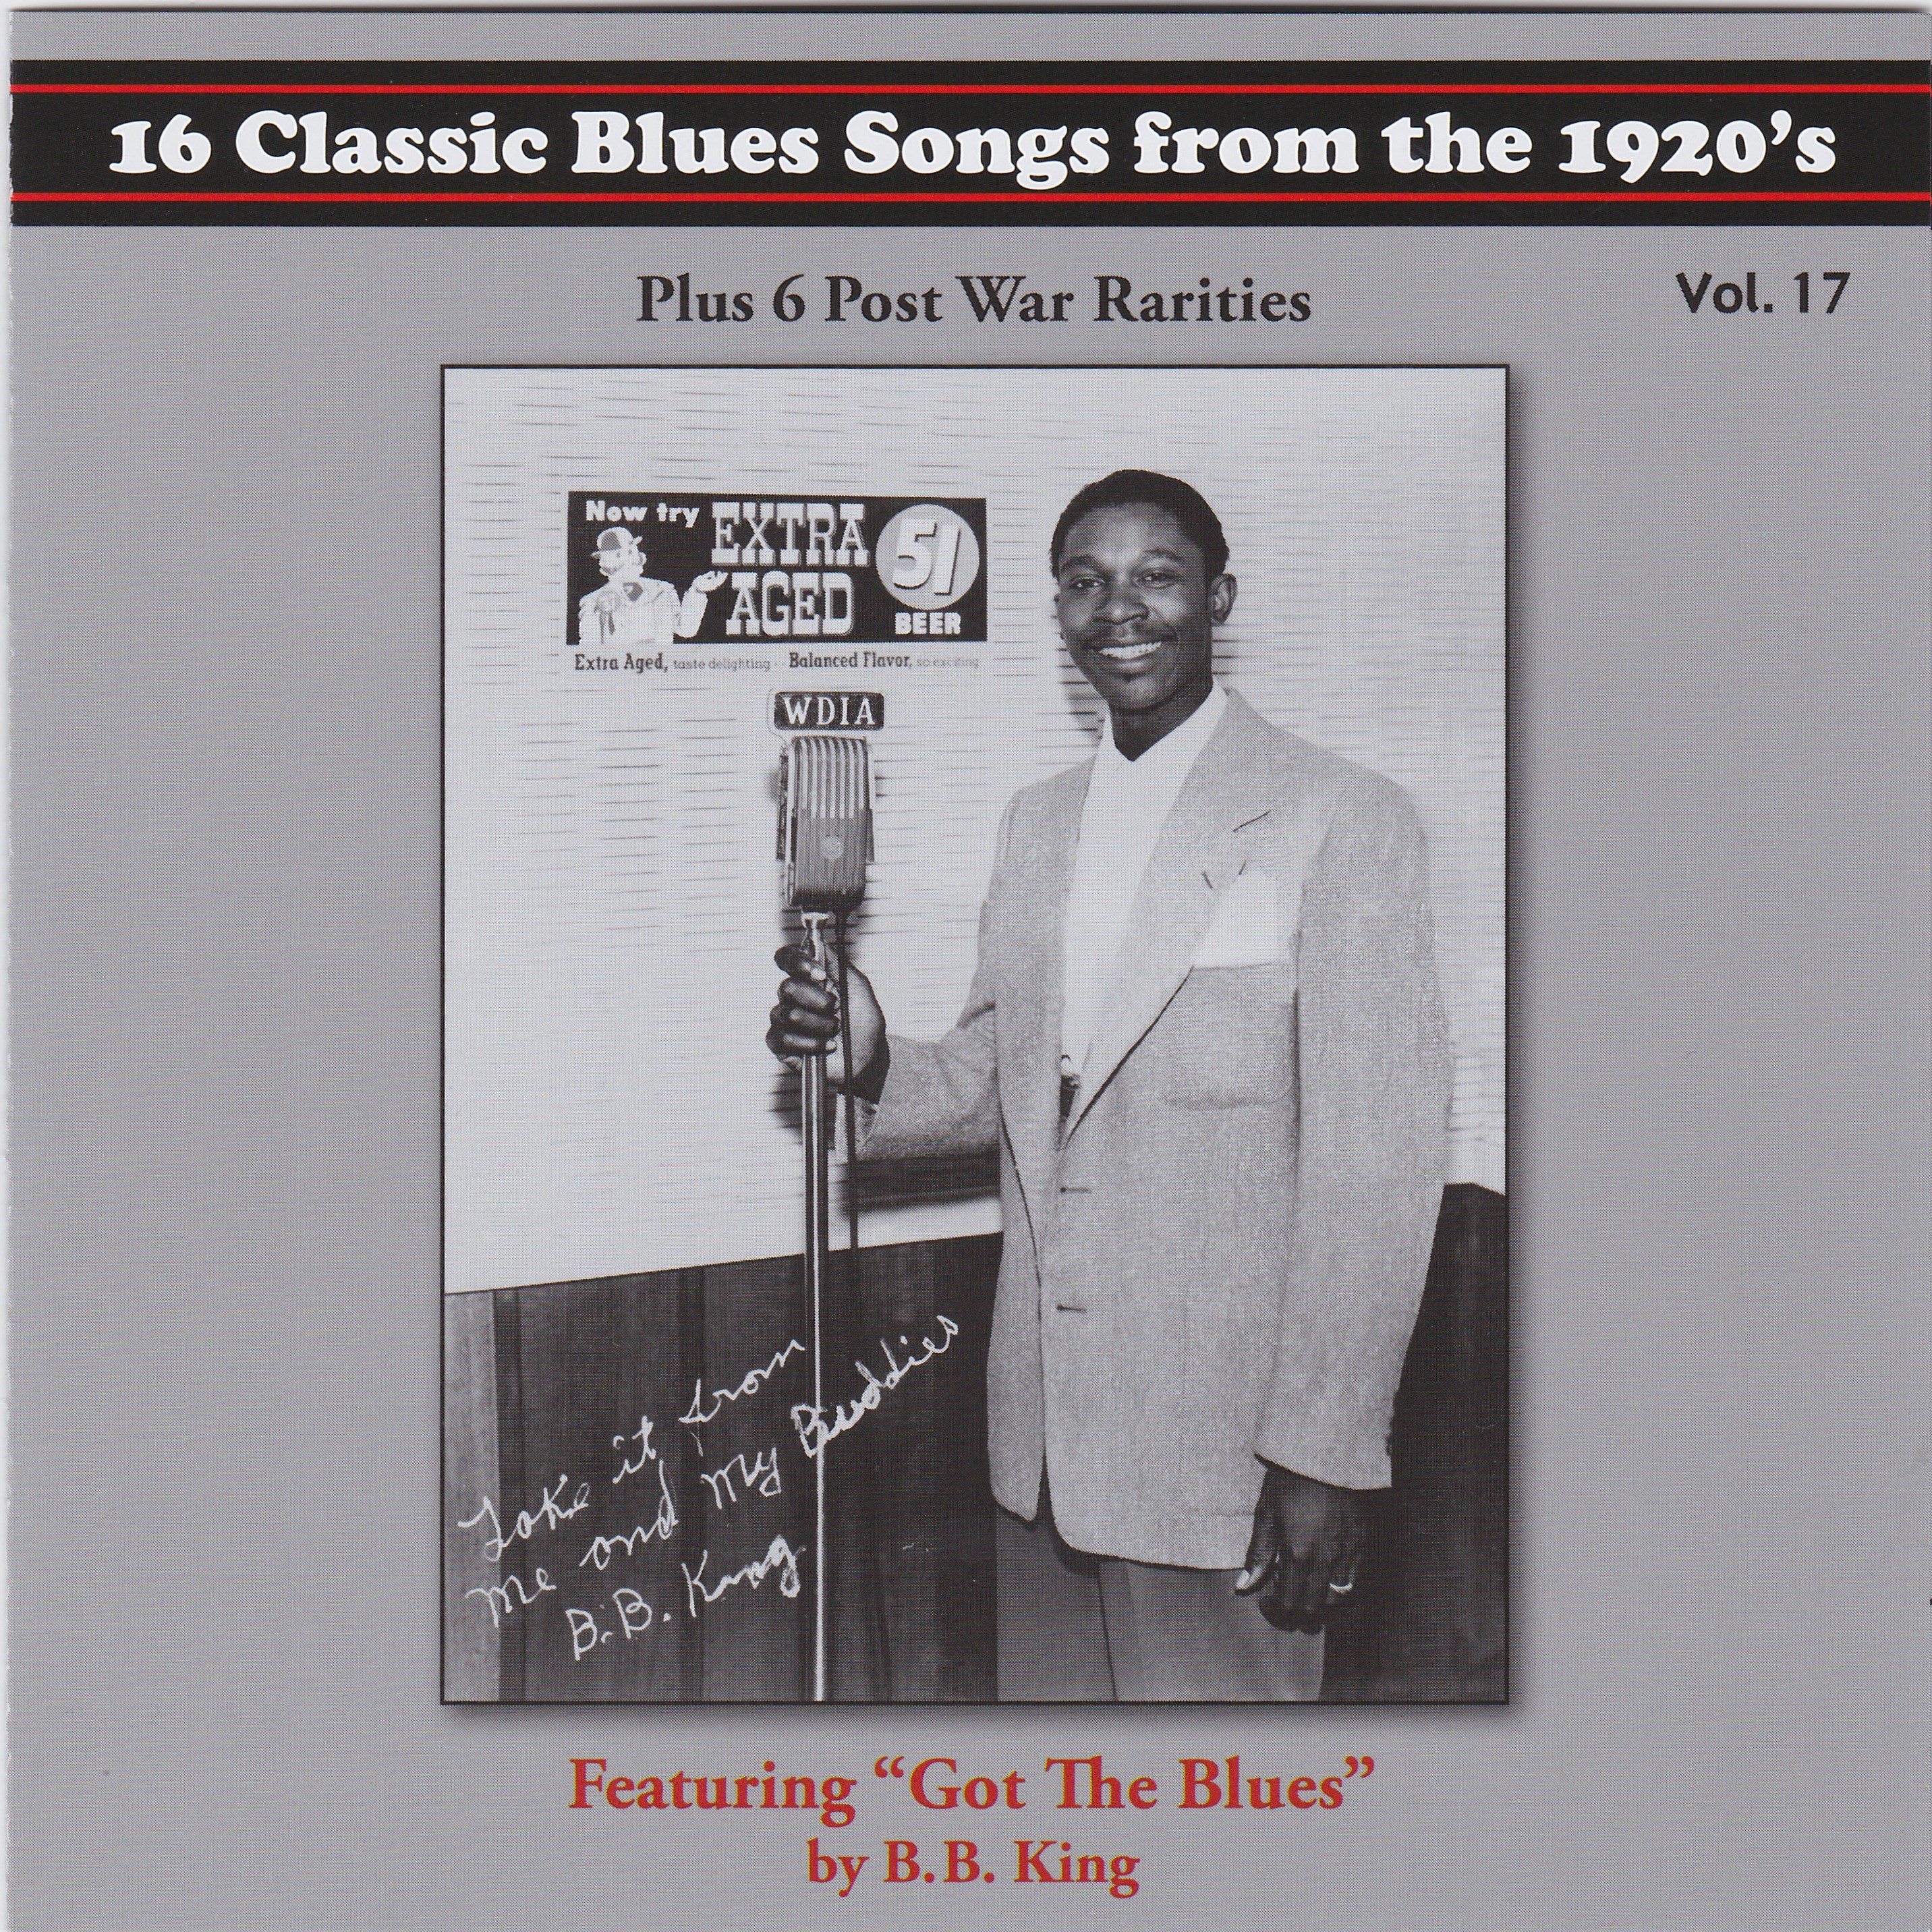 Blues Images Present    22 Classic Blues Songs from the 1920's, Vol  17